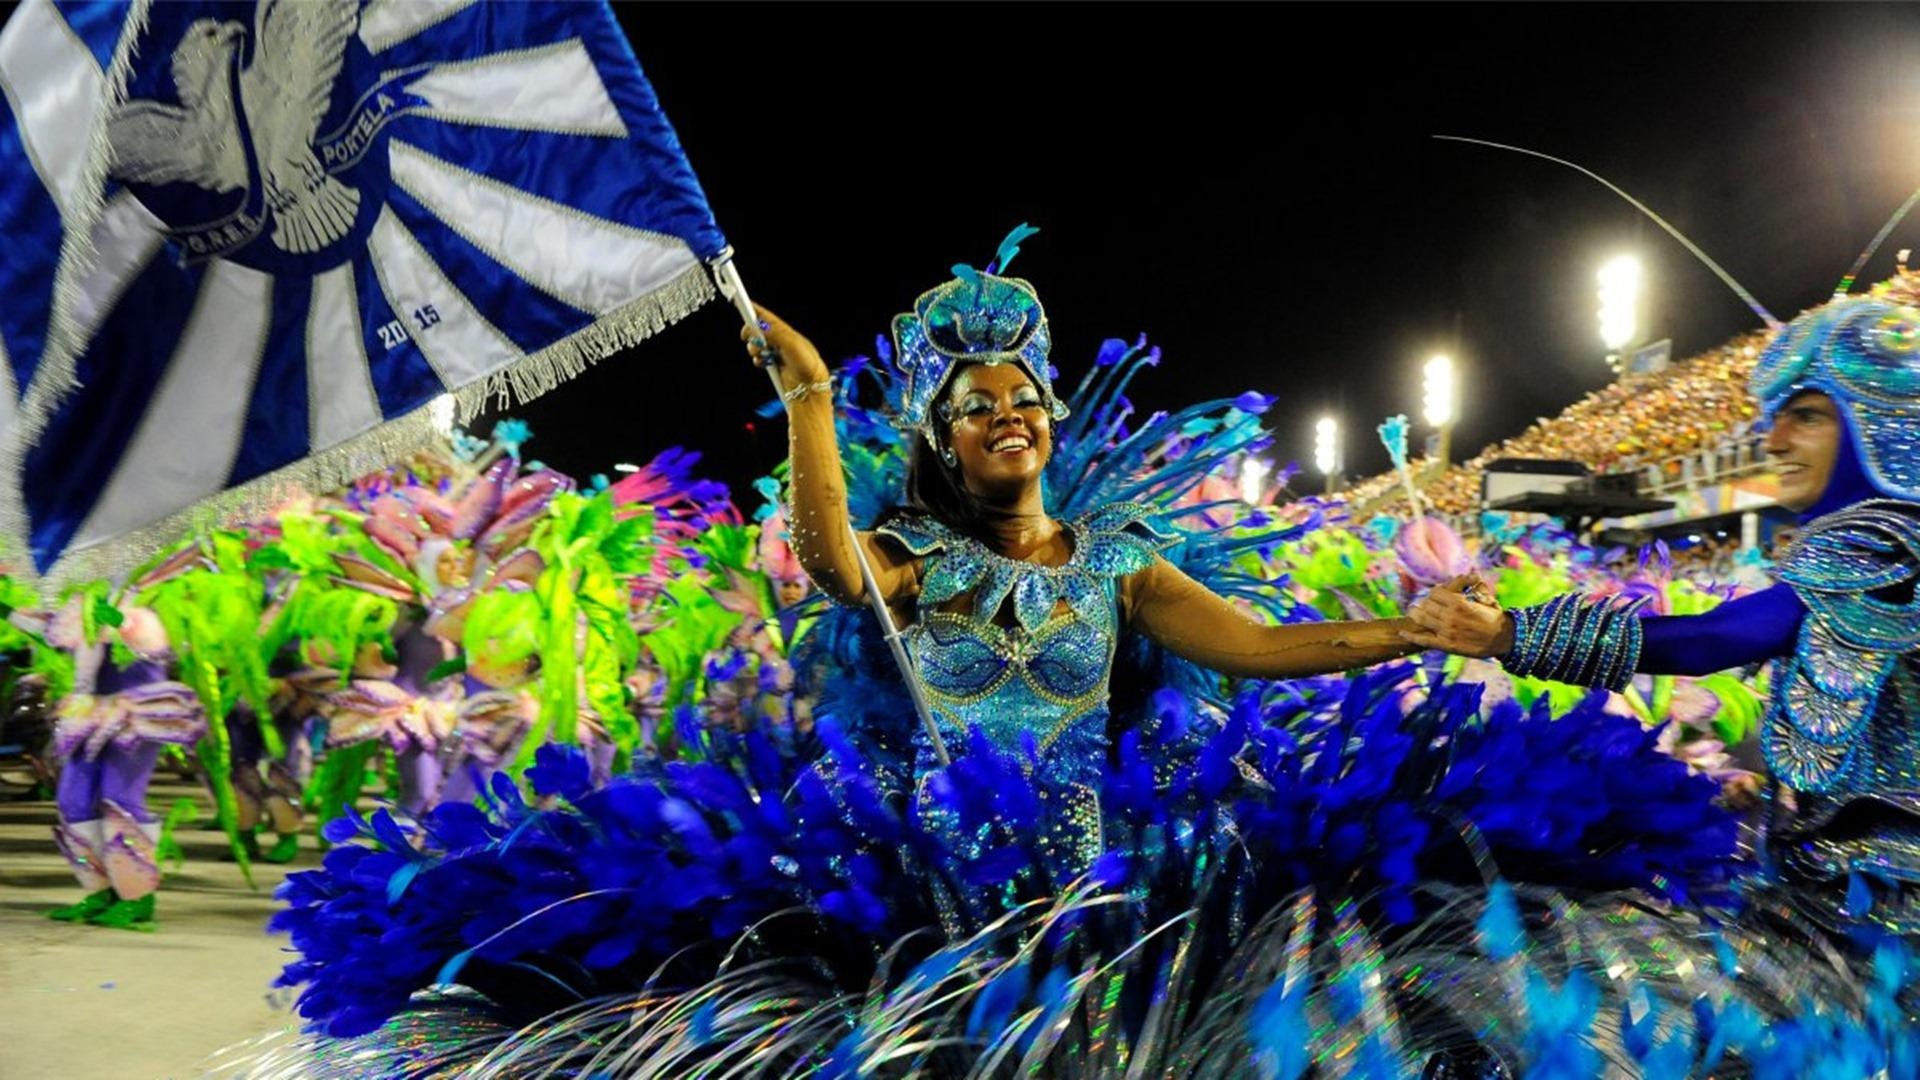 Samba: Rio Carnival, A dance that was introduced by African people on arrival in Brazil. 1920x1080 Full HD Background.